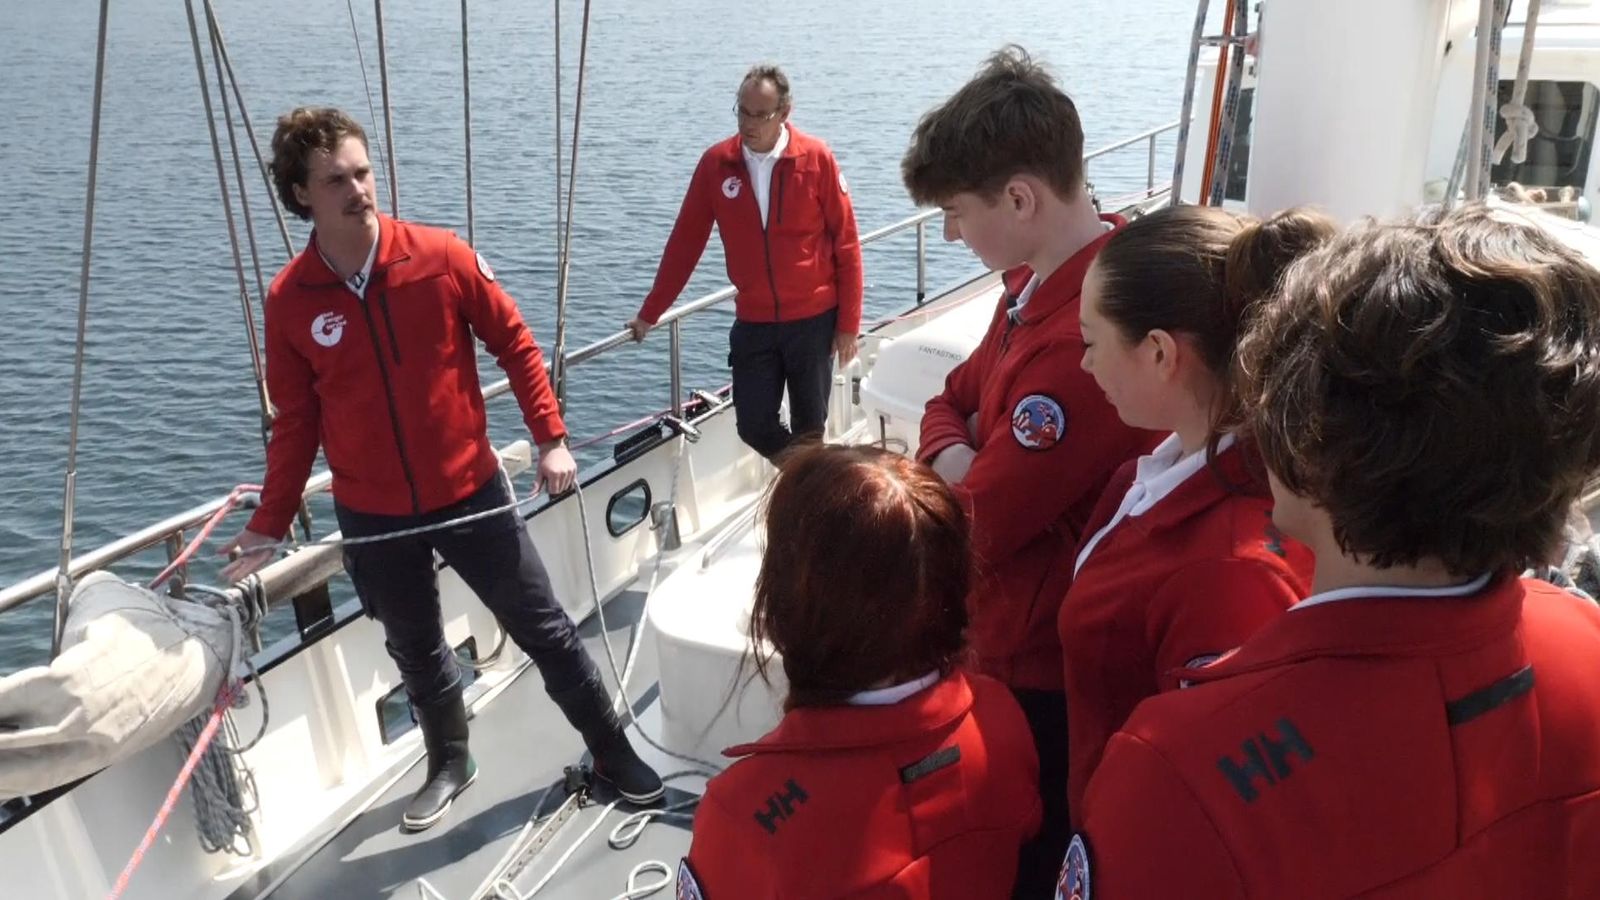 Sea Rangers Service reaches the UK - with youngsters being paid to protect our oceans